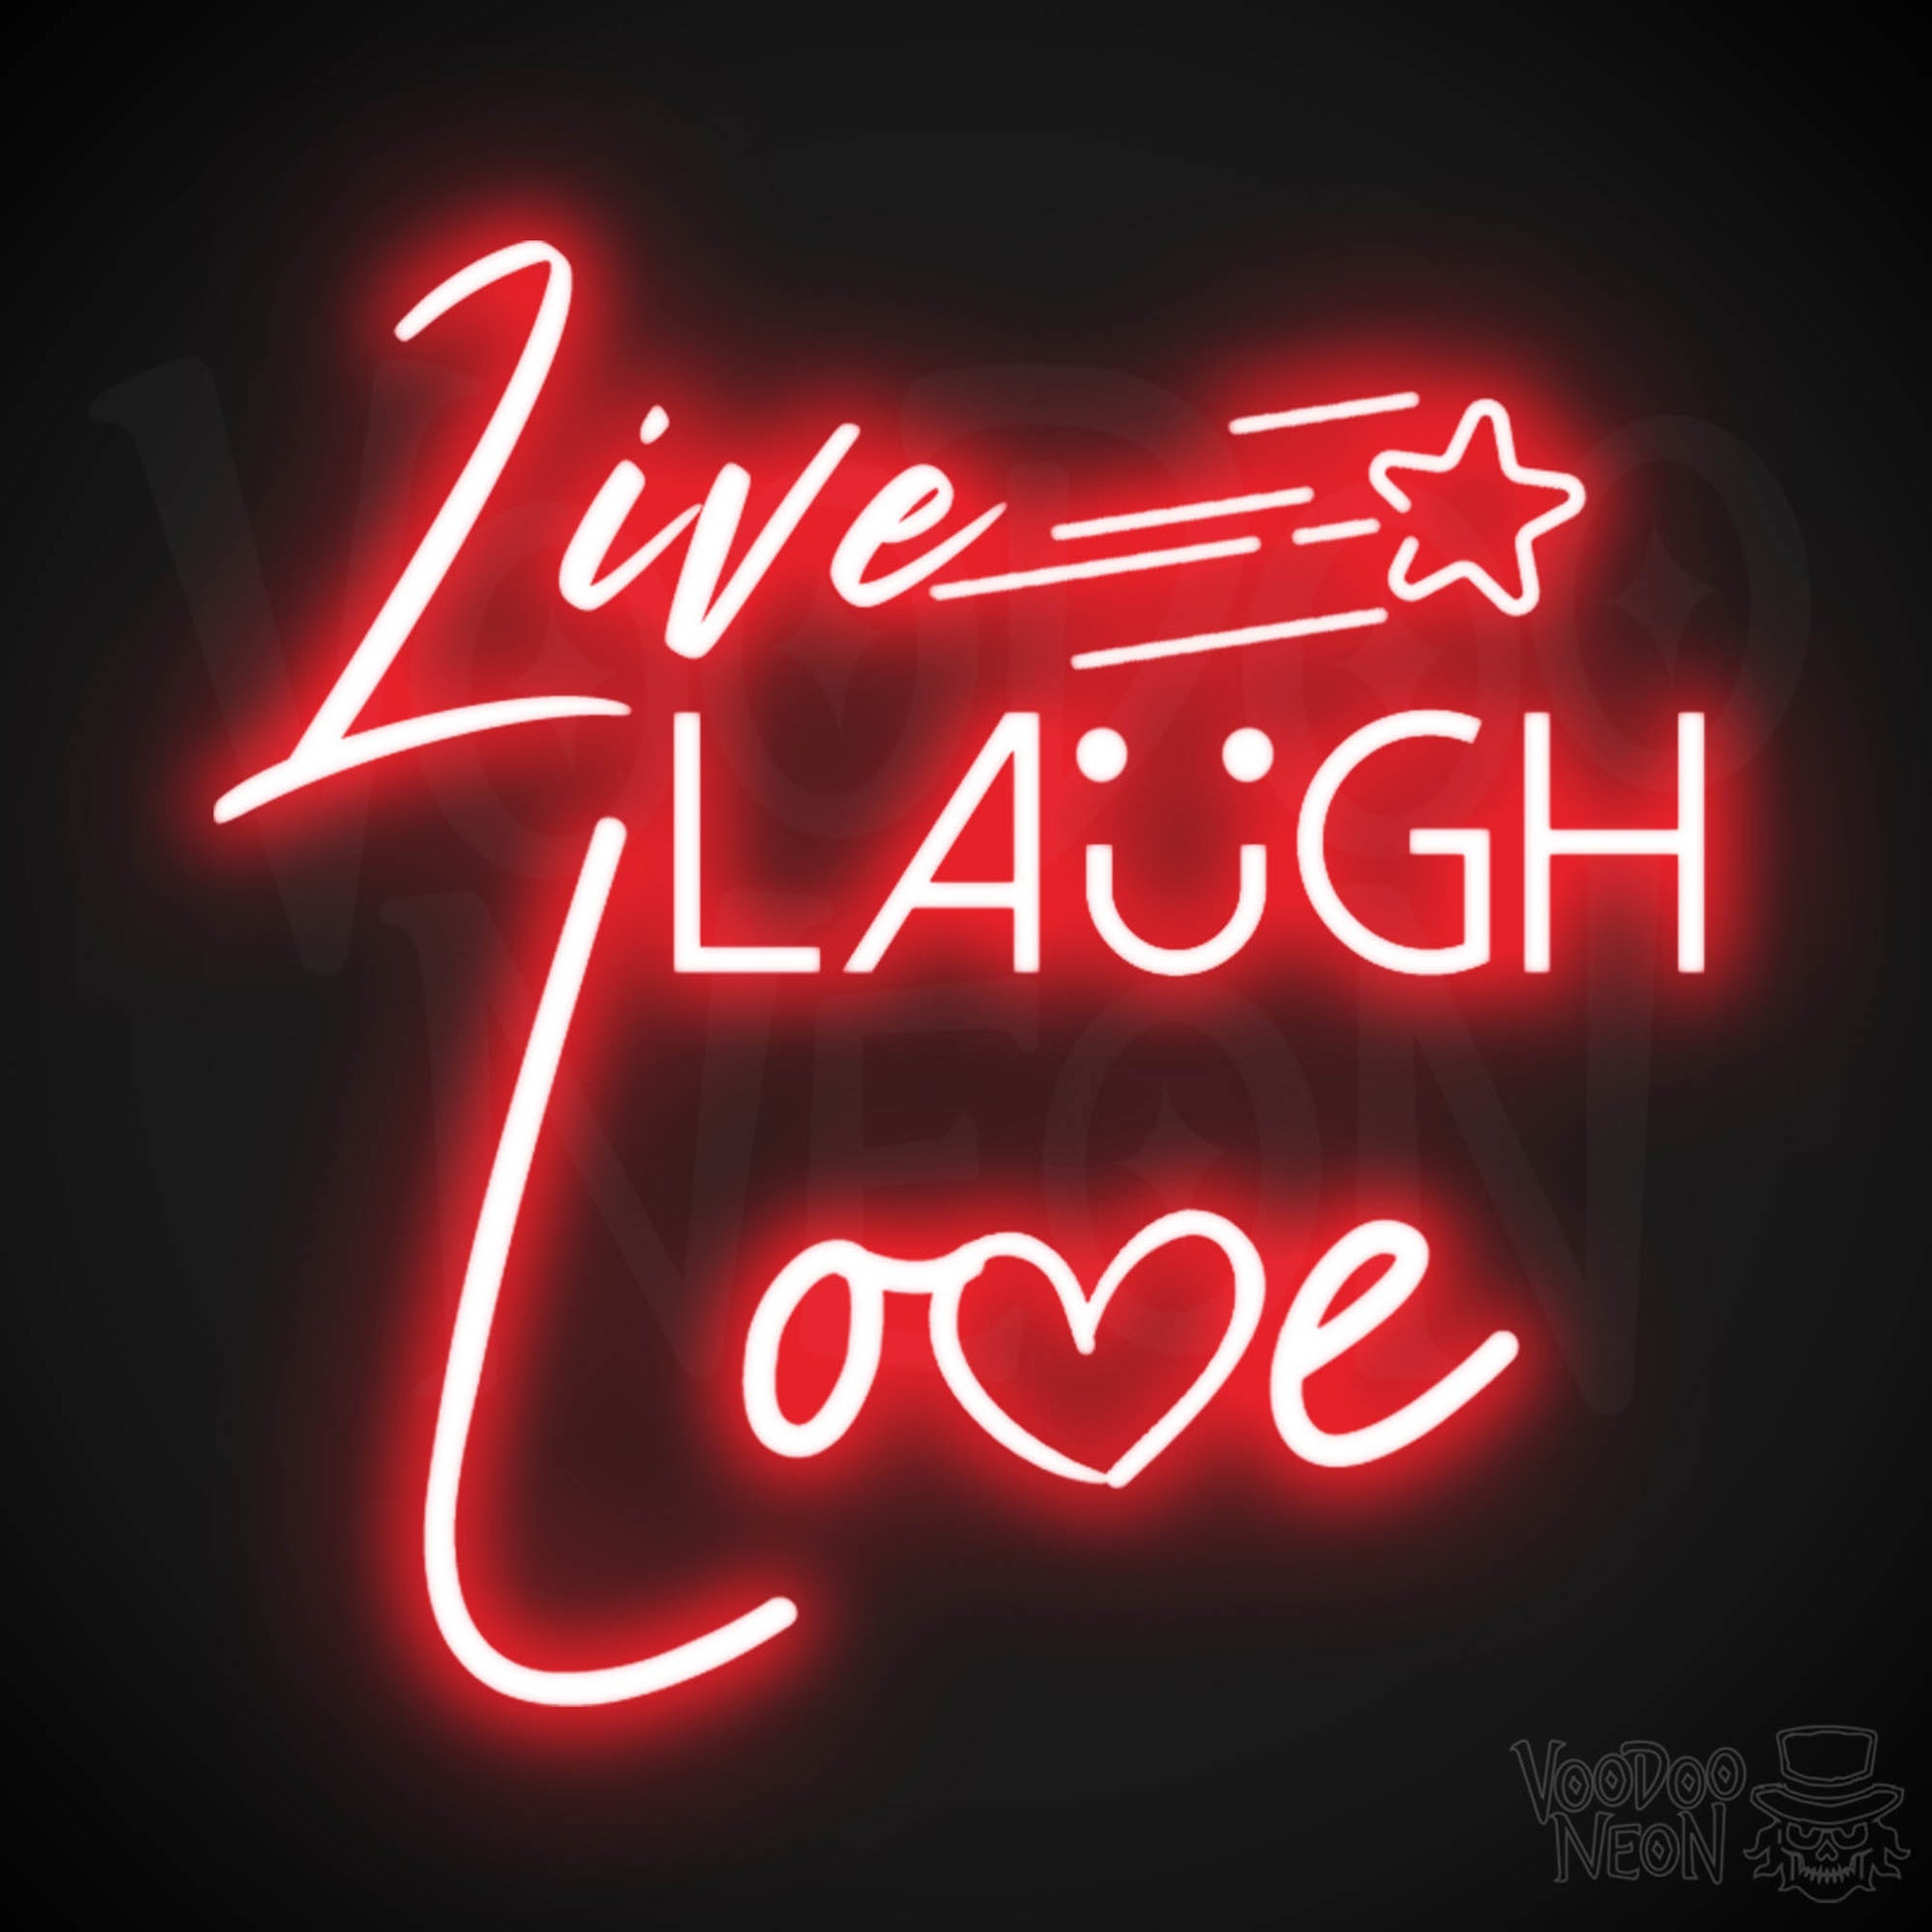 Live Laugh Love Neon Sign - Neon Live Laugh Love Sign - Wall Art - Color Red